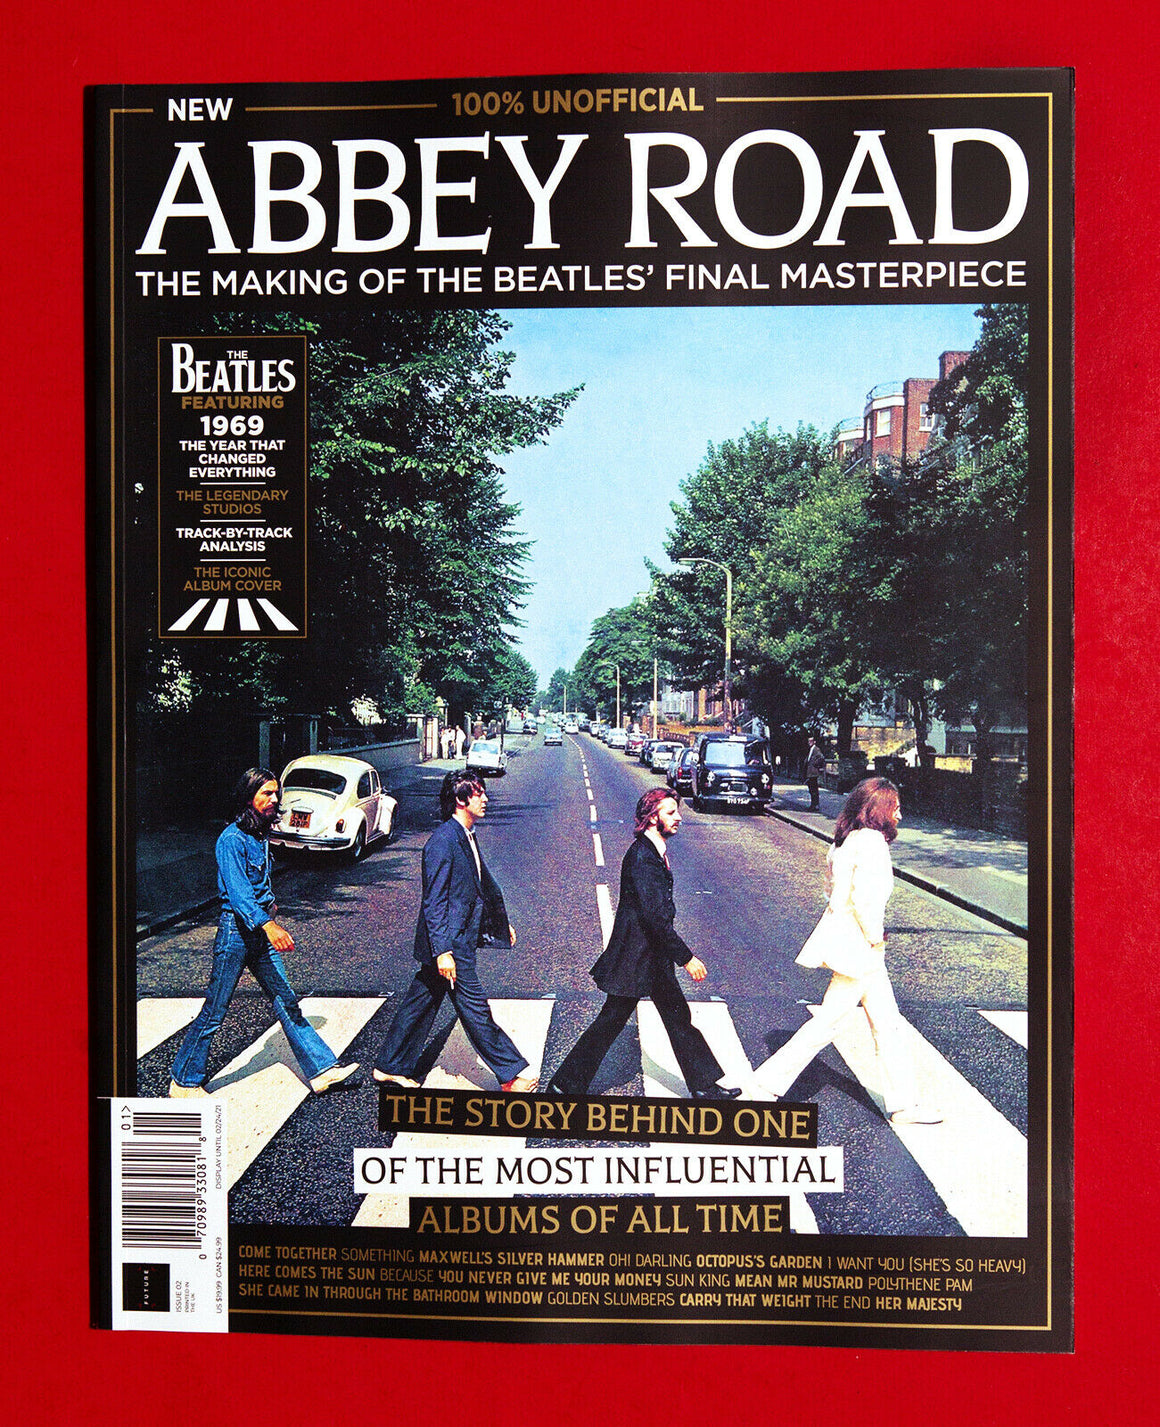 The Beatles ABBEY ROAD Making Of Their Final Masterpiece 2020 Classic Rock BOOK